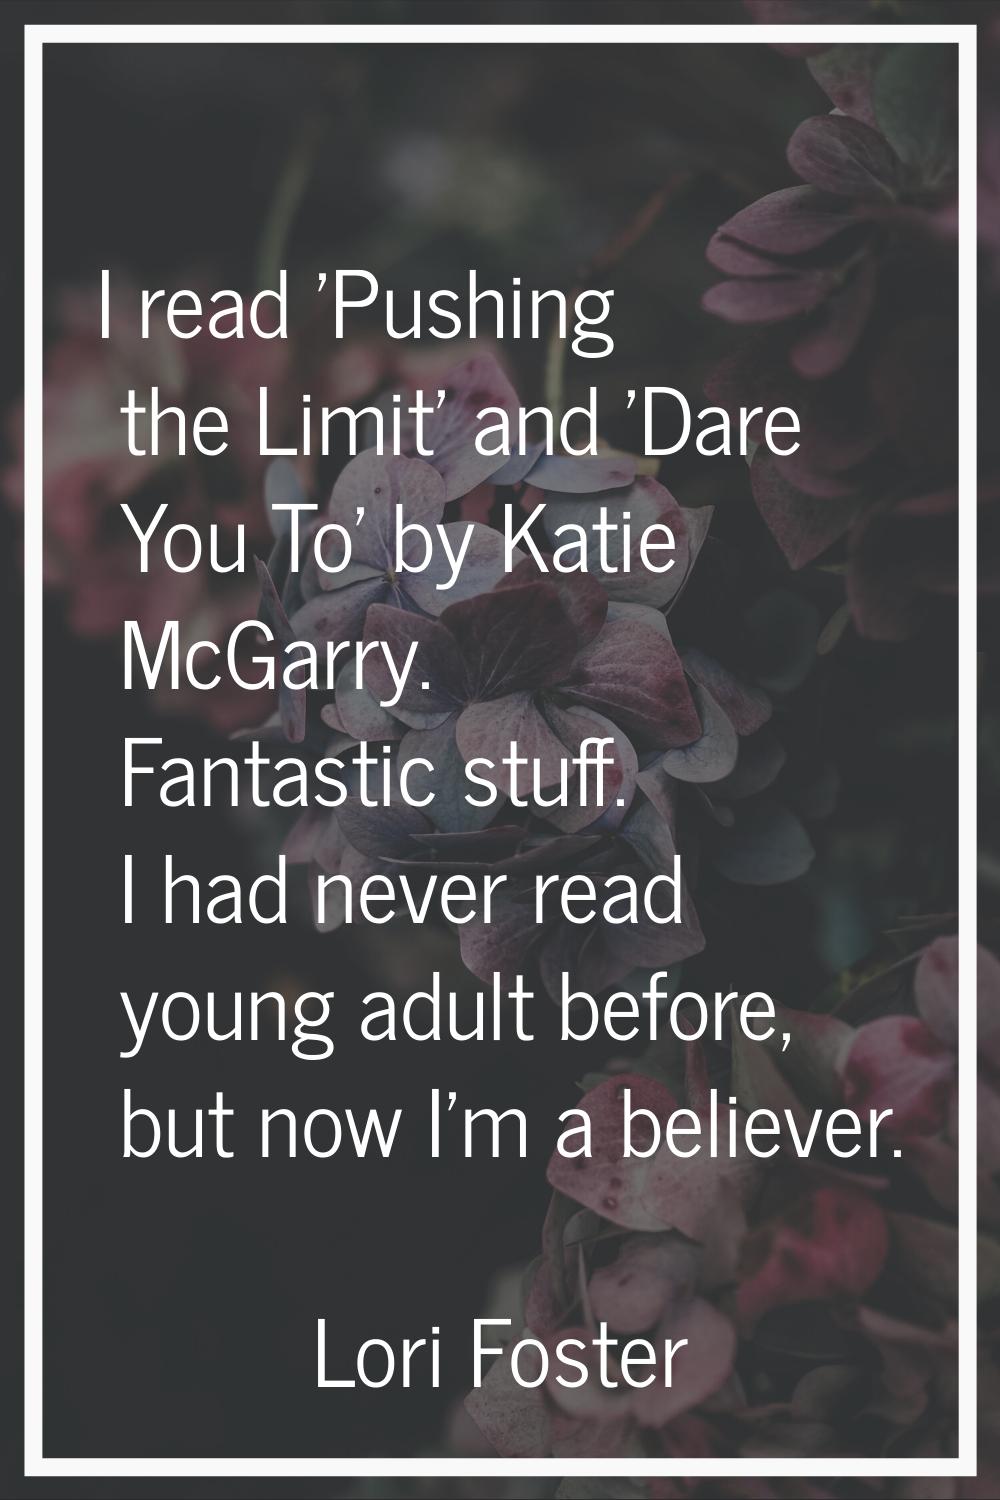 I read 'Pushing the Limit' and 'Dare You To' by Katie McGarry. Fantastic stuff. I had never read yo